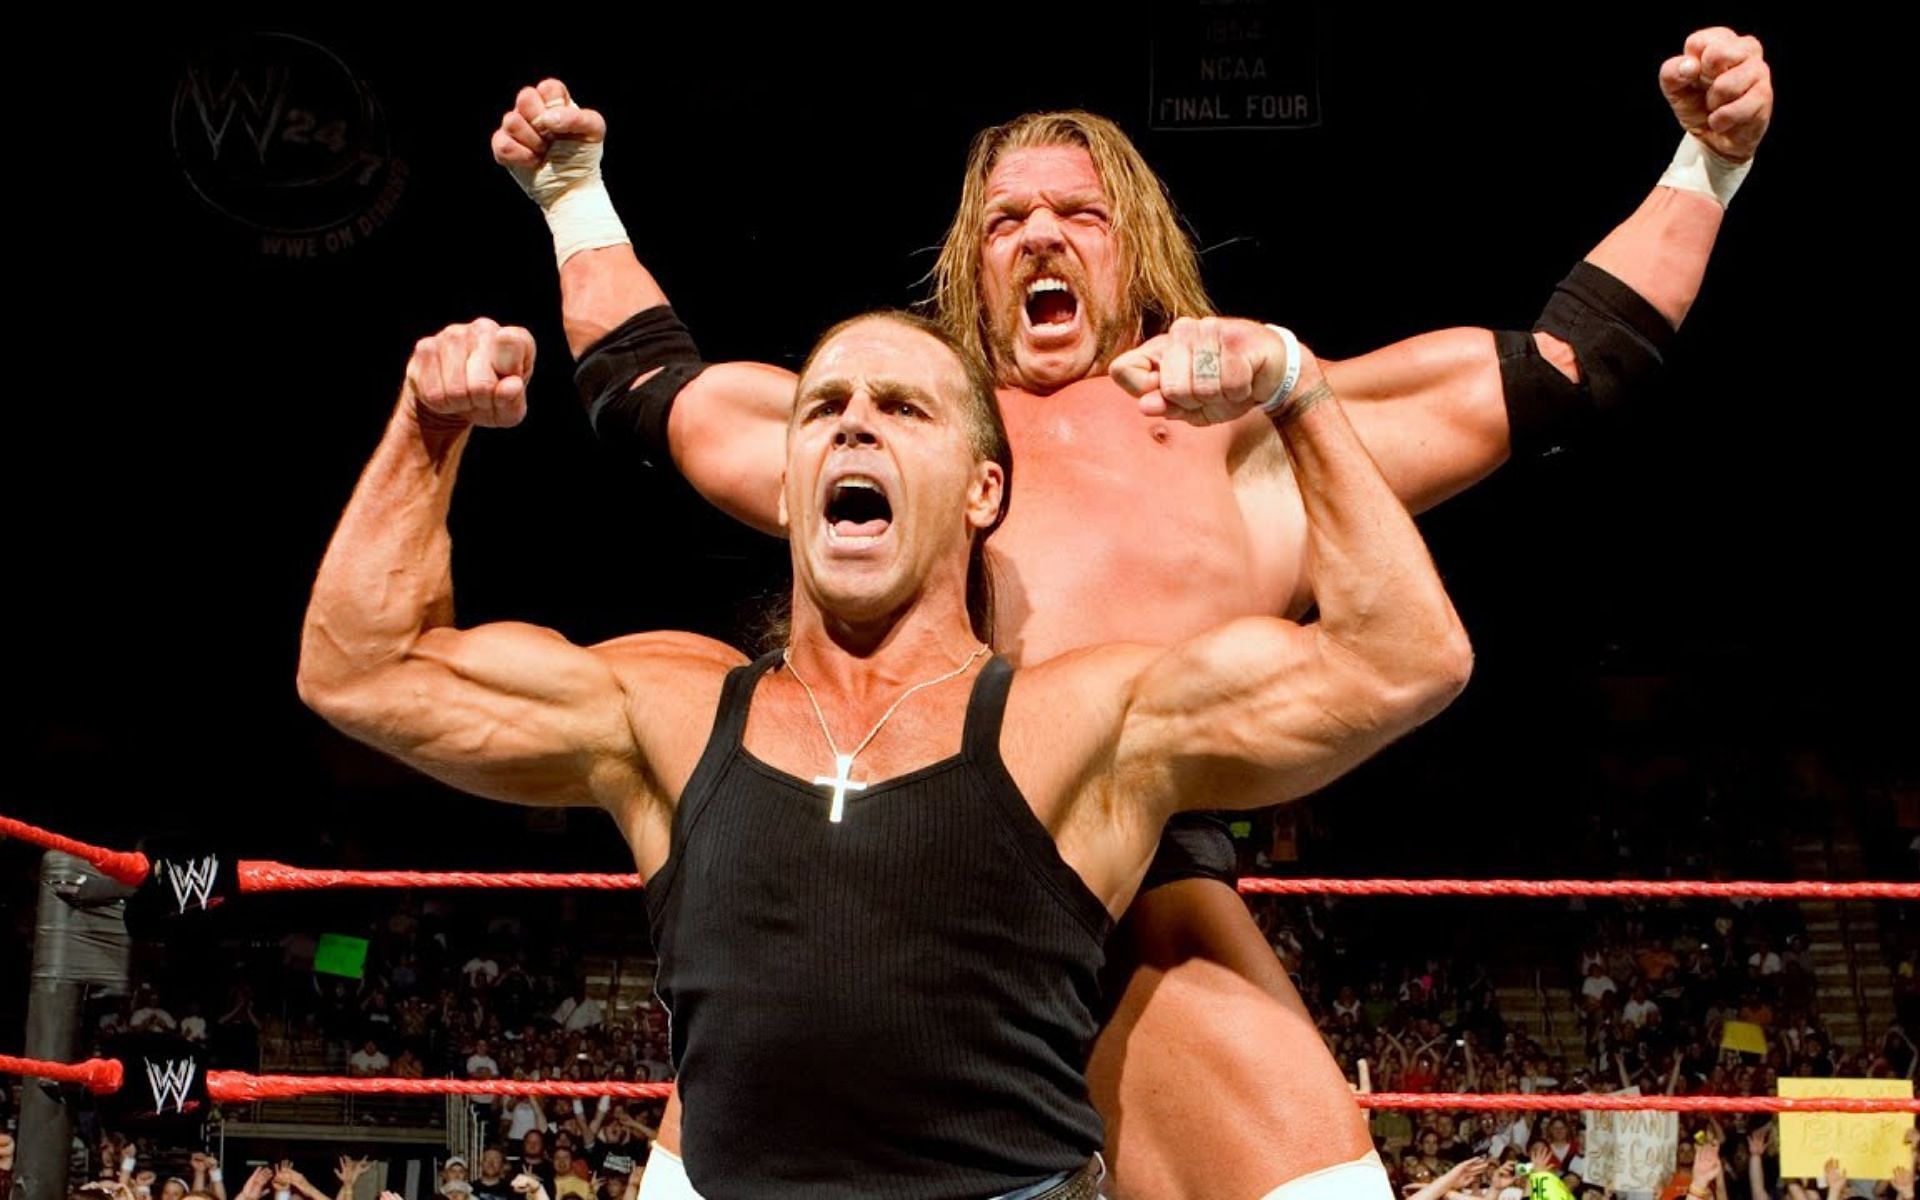 DX was created by Triple H and Shawn Michaels!